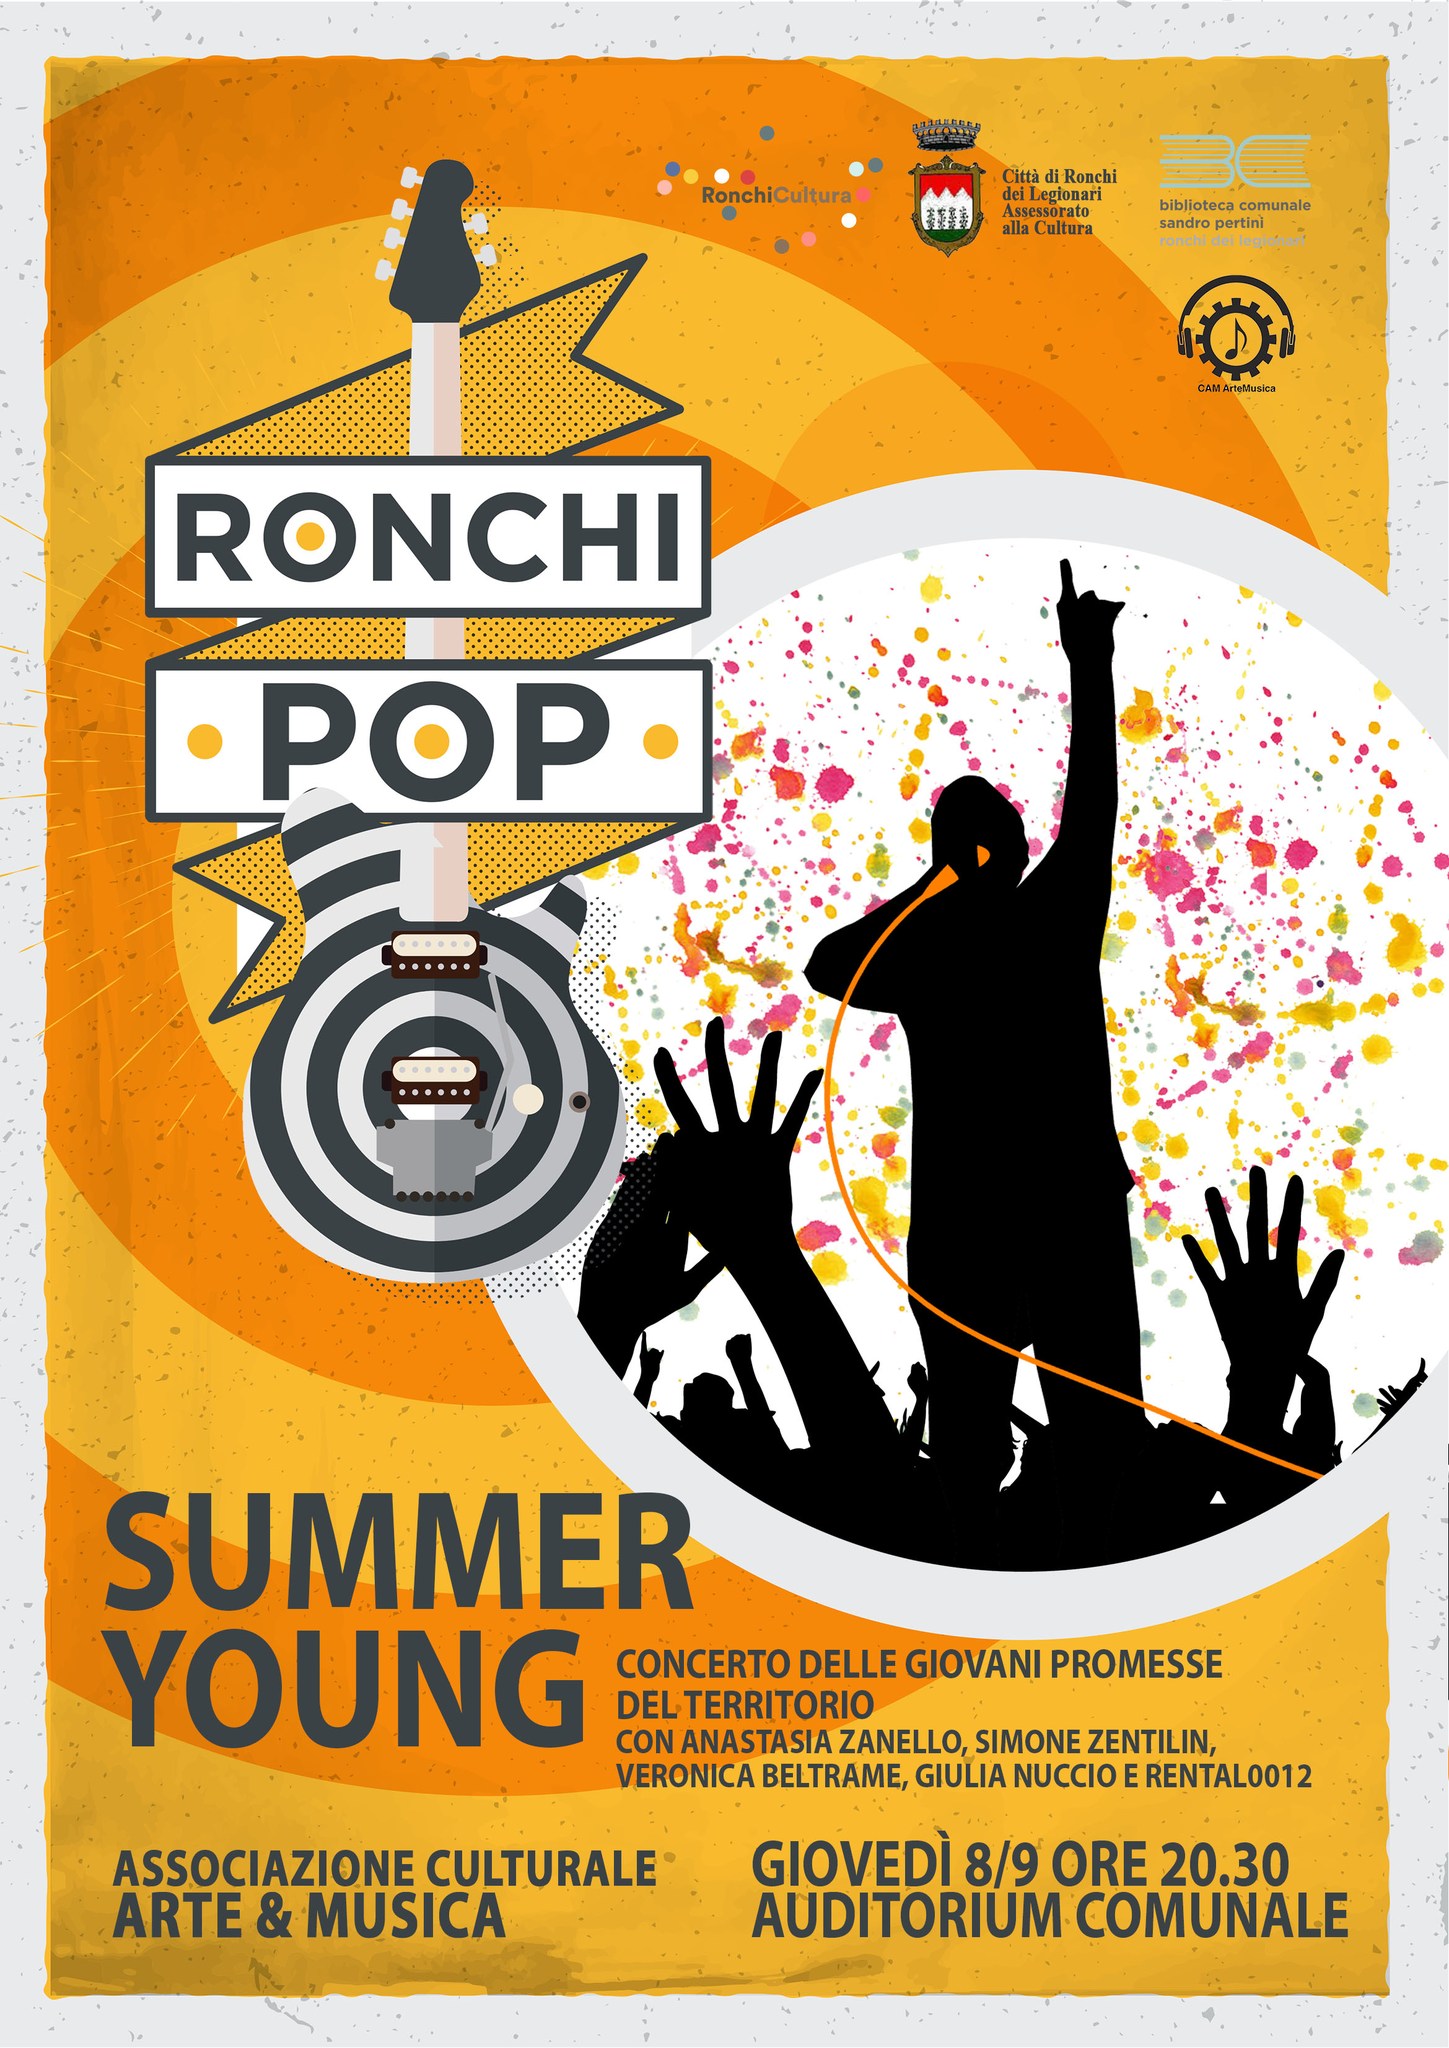 RONCHI POP. Summer Young